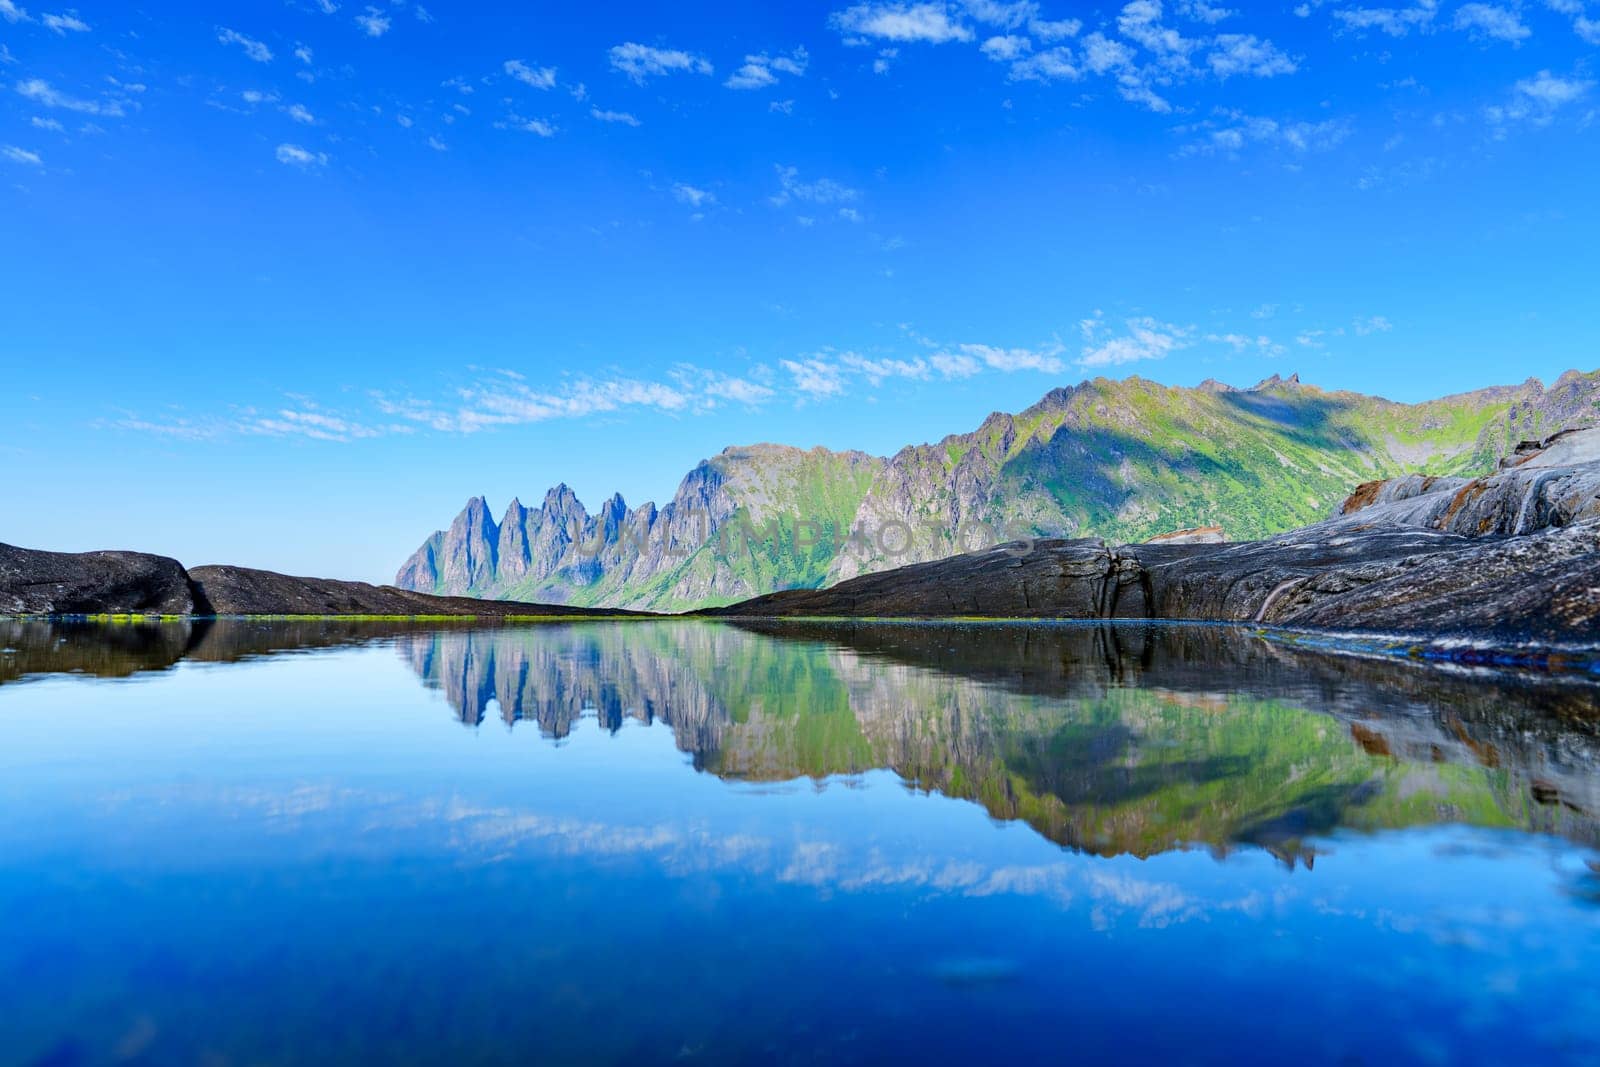 A breathtaking image of a Norwegian summer day, capturing the fairytale landscape with its serene sea, majestic mountains, and stunning reflections in the sky.